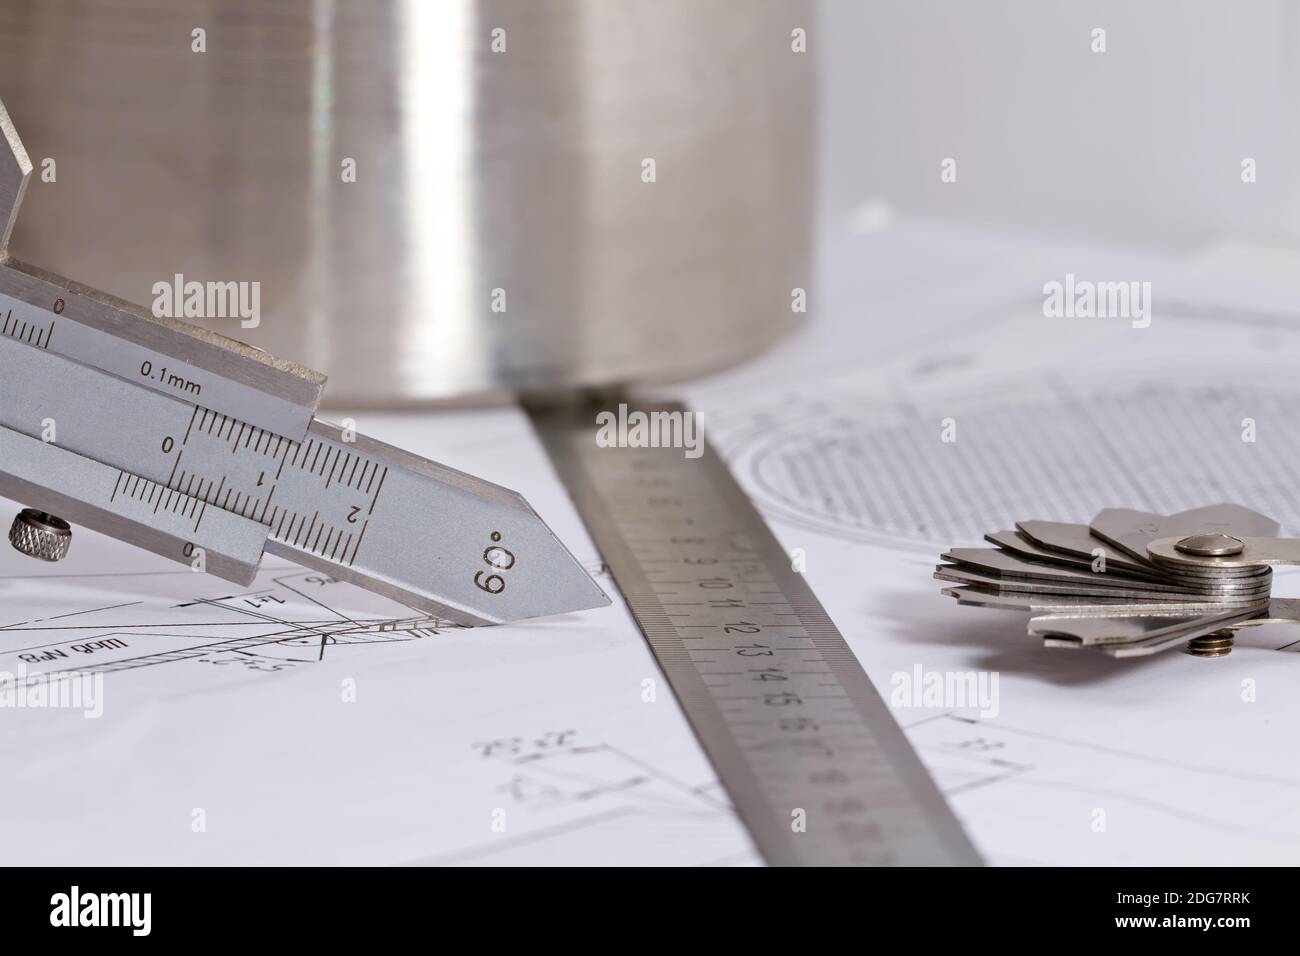 Templates for visual measurement control are on the drawing pipe element Stock Photo